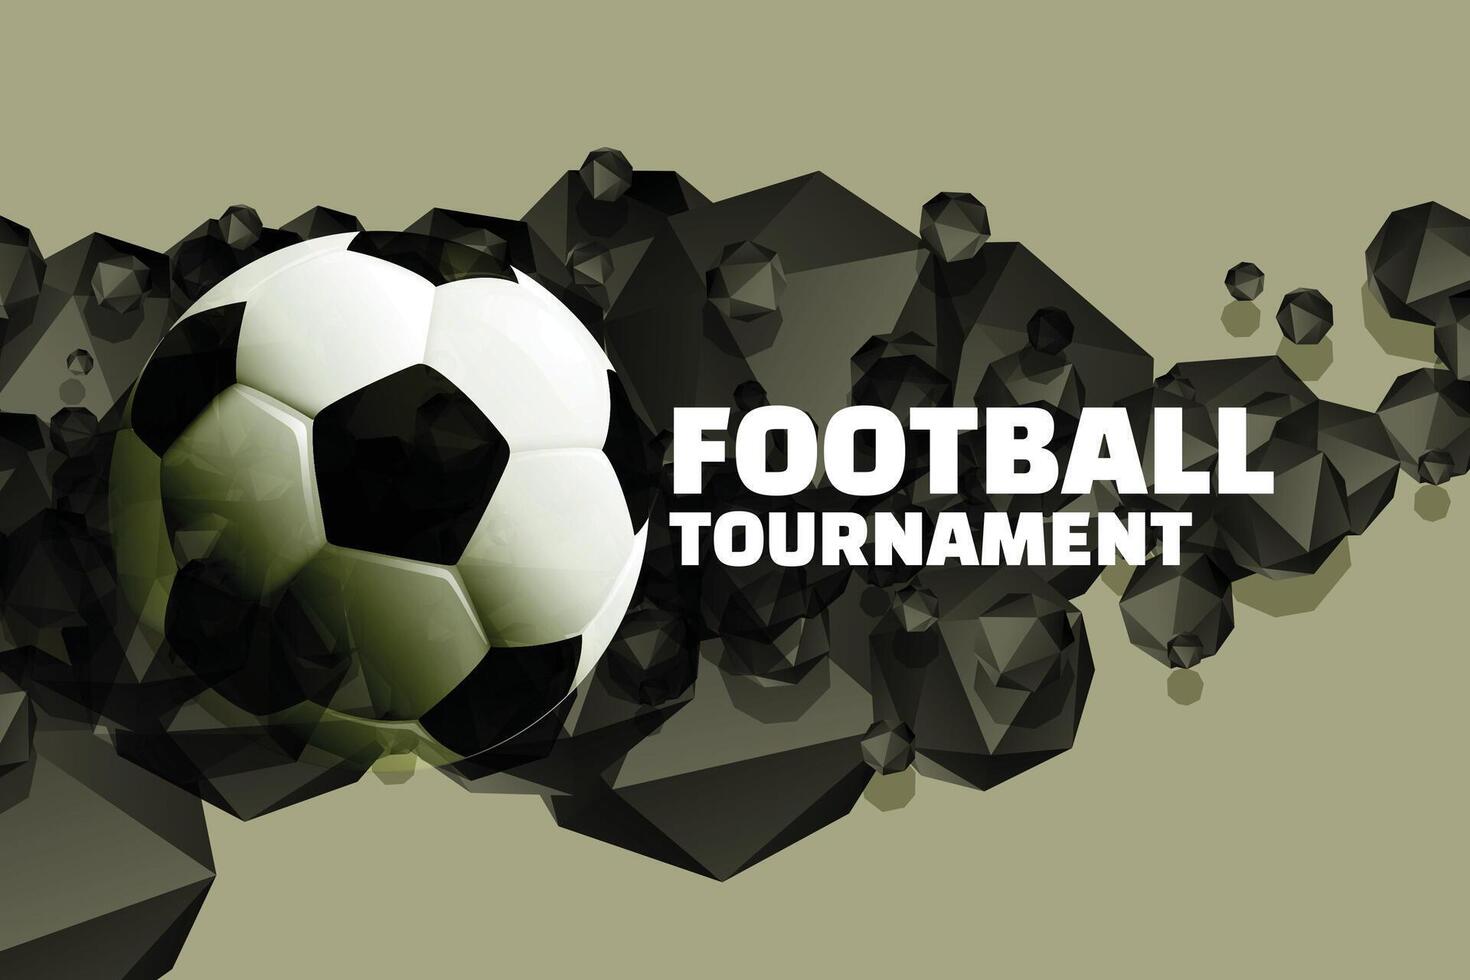 football tournament background with abstract 3d shapes vector